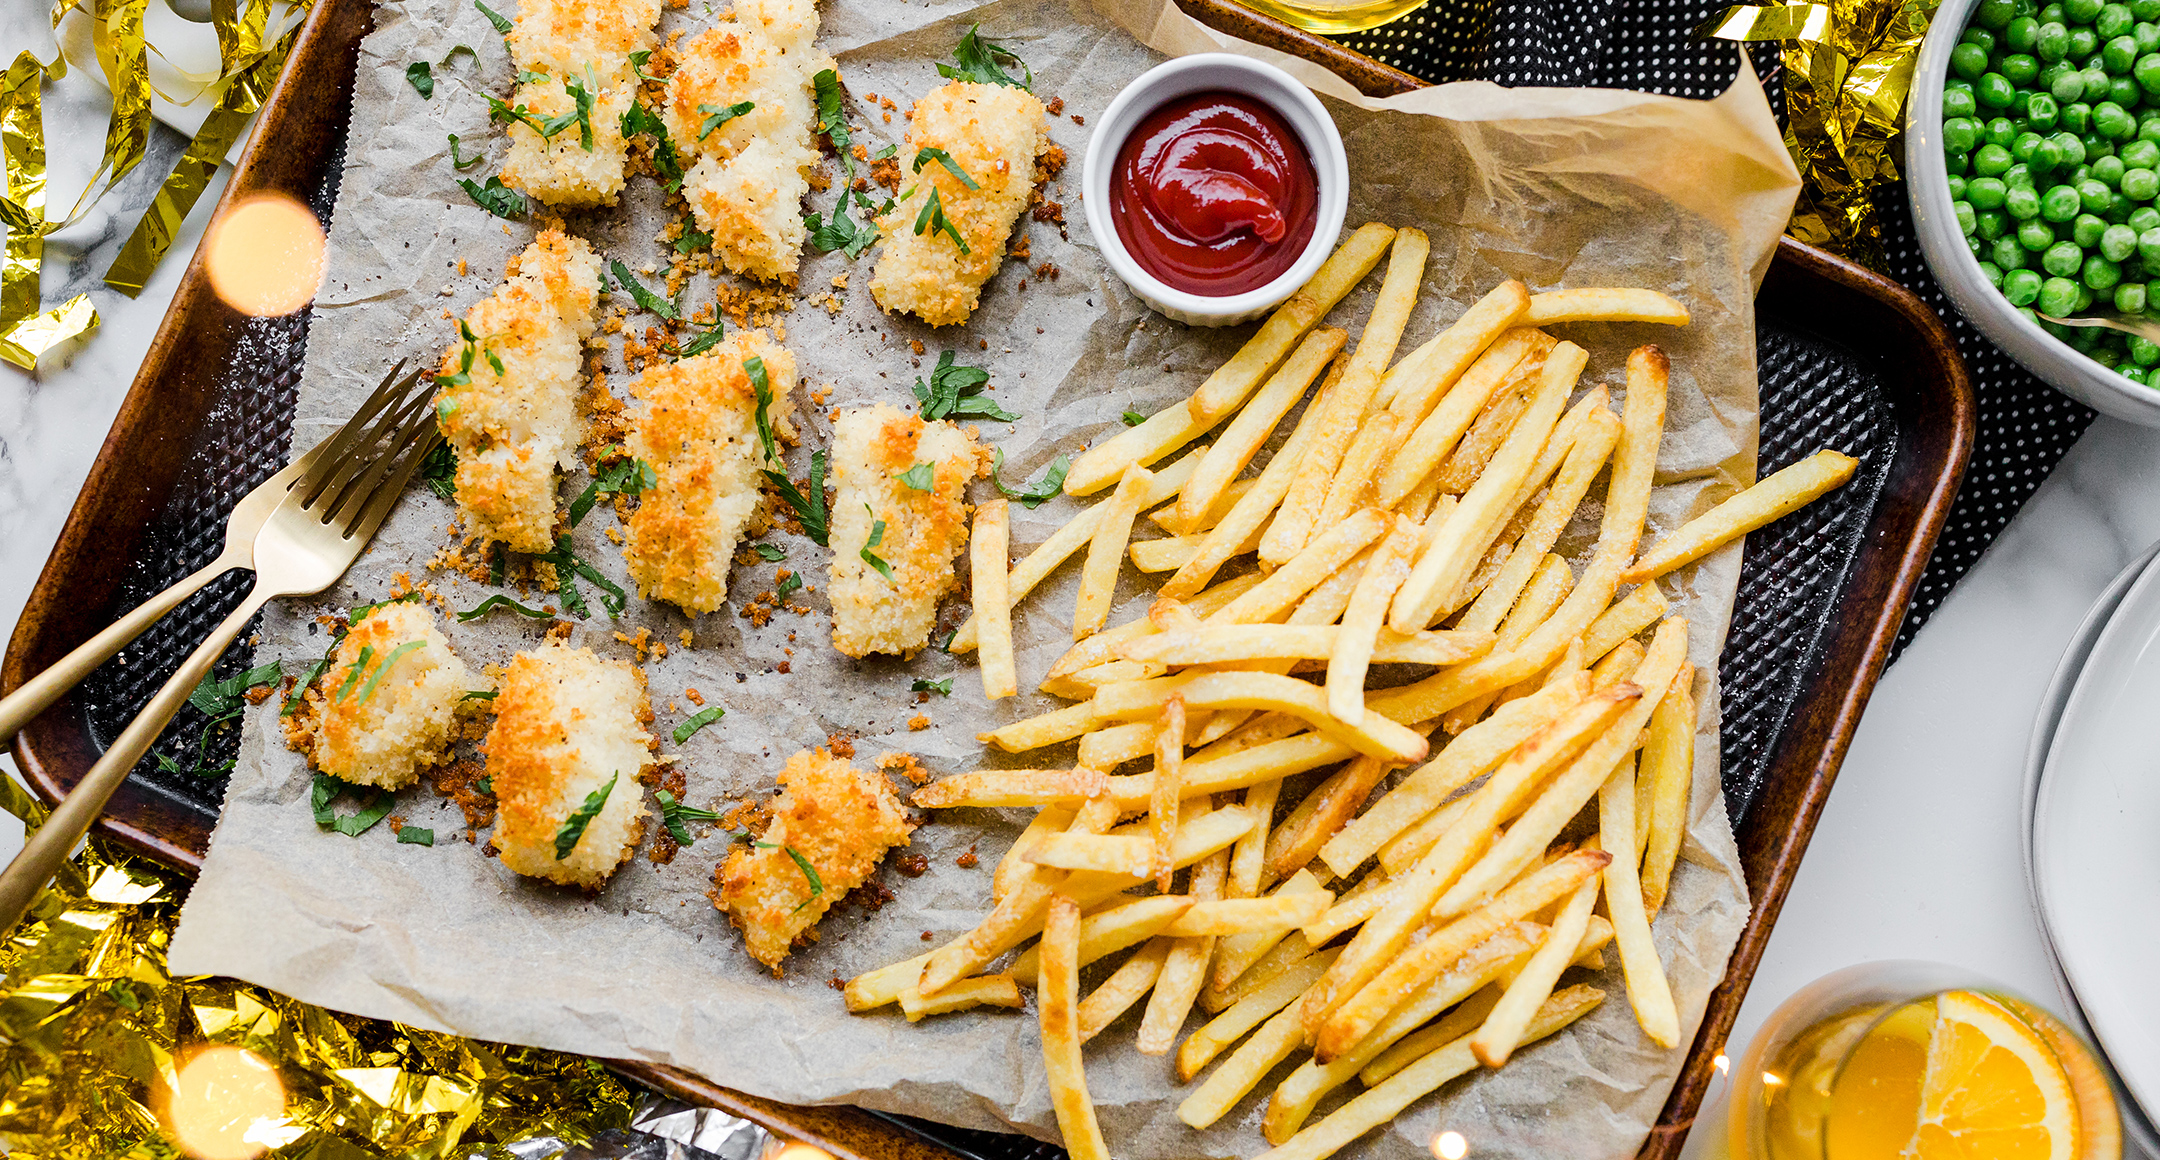 A sheet pan filled with breaded and baked cod fillets with a side of French fries.